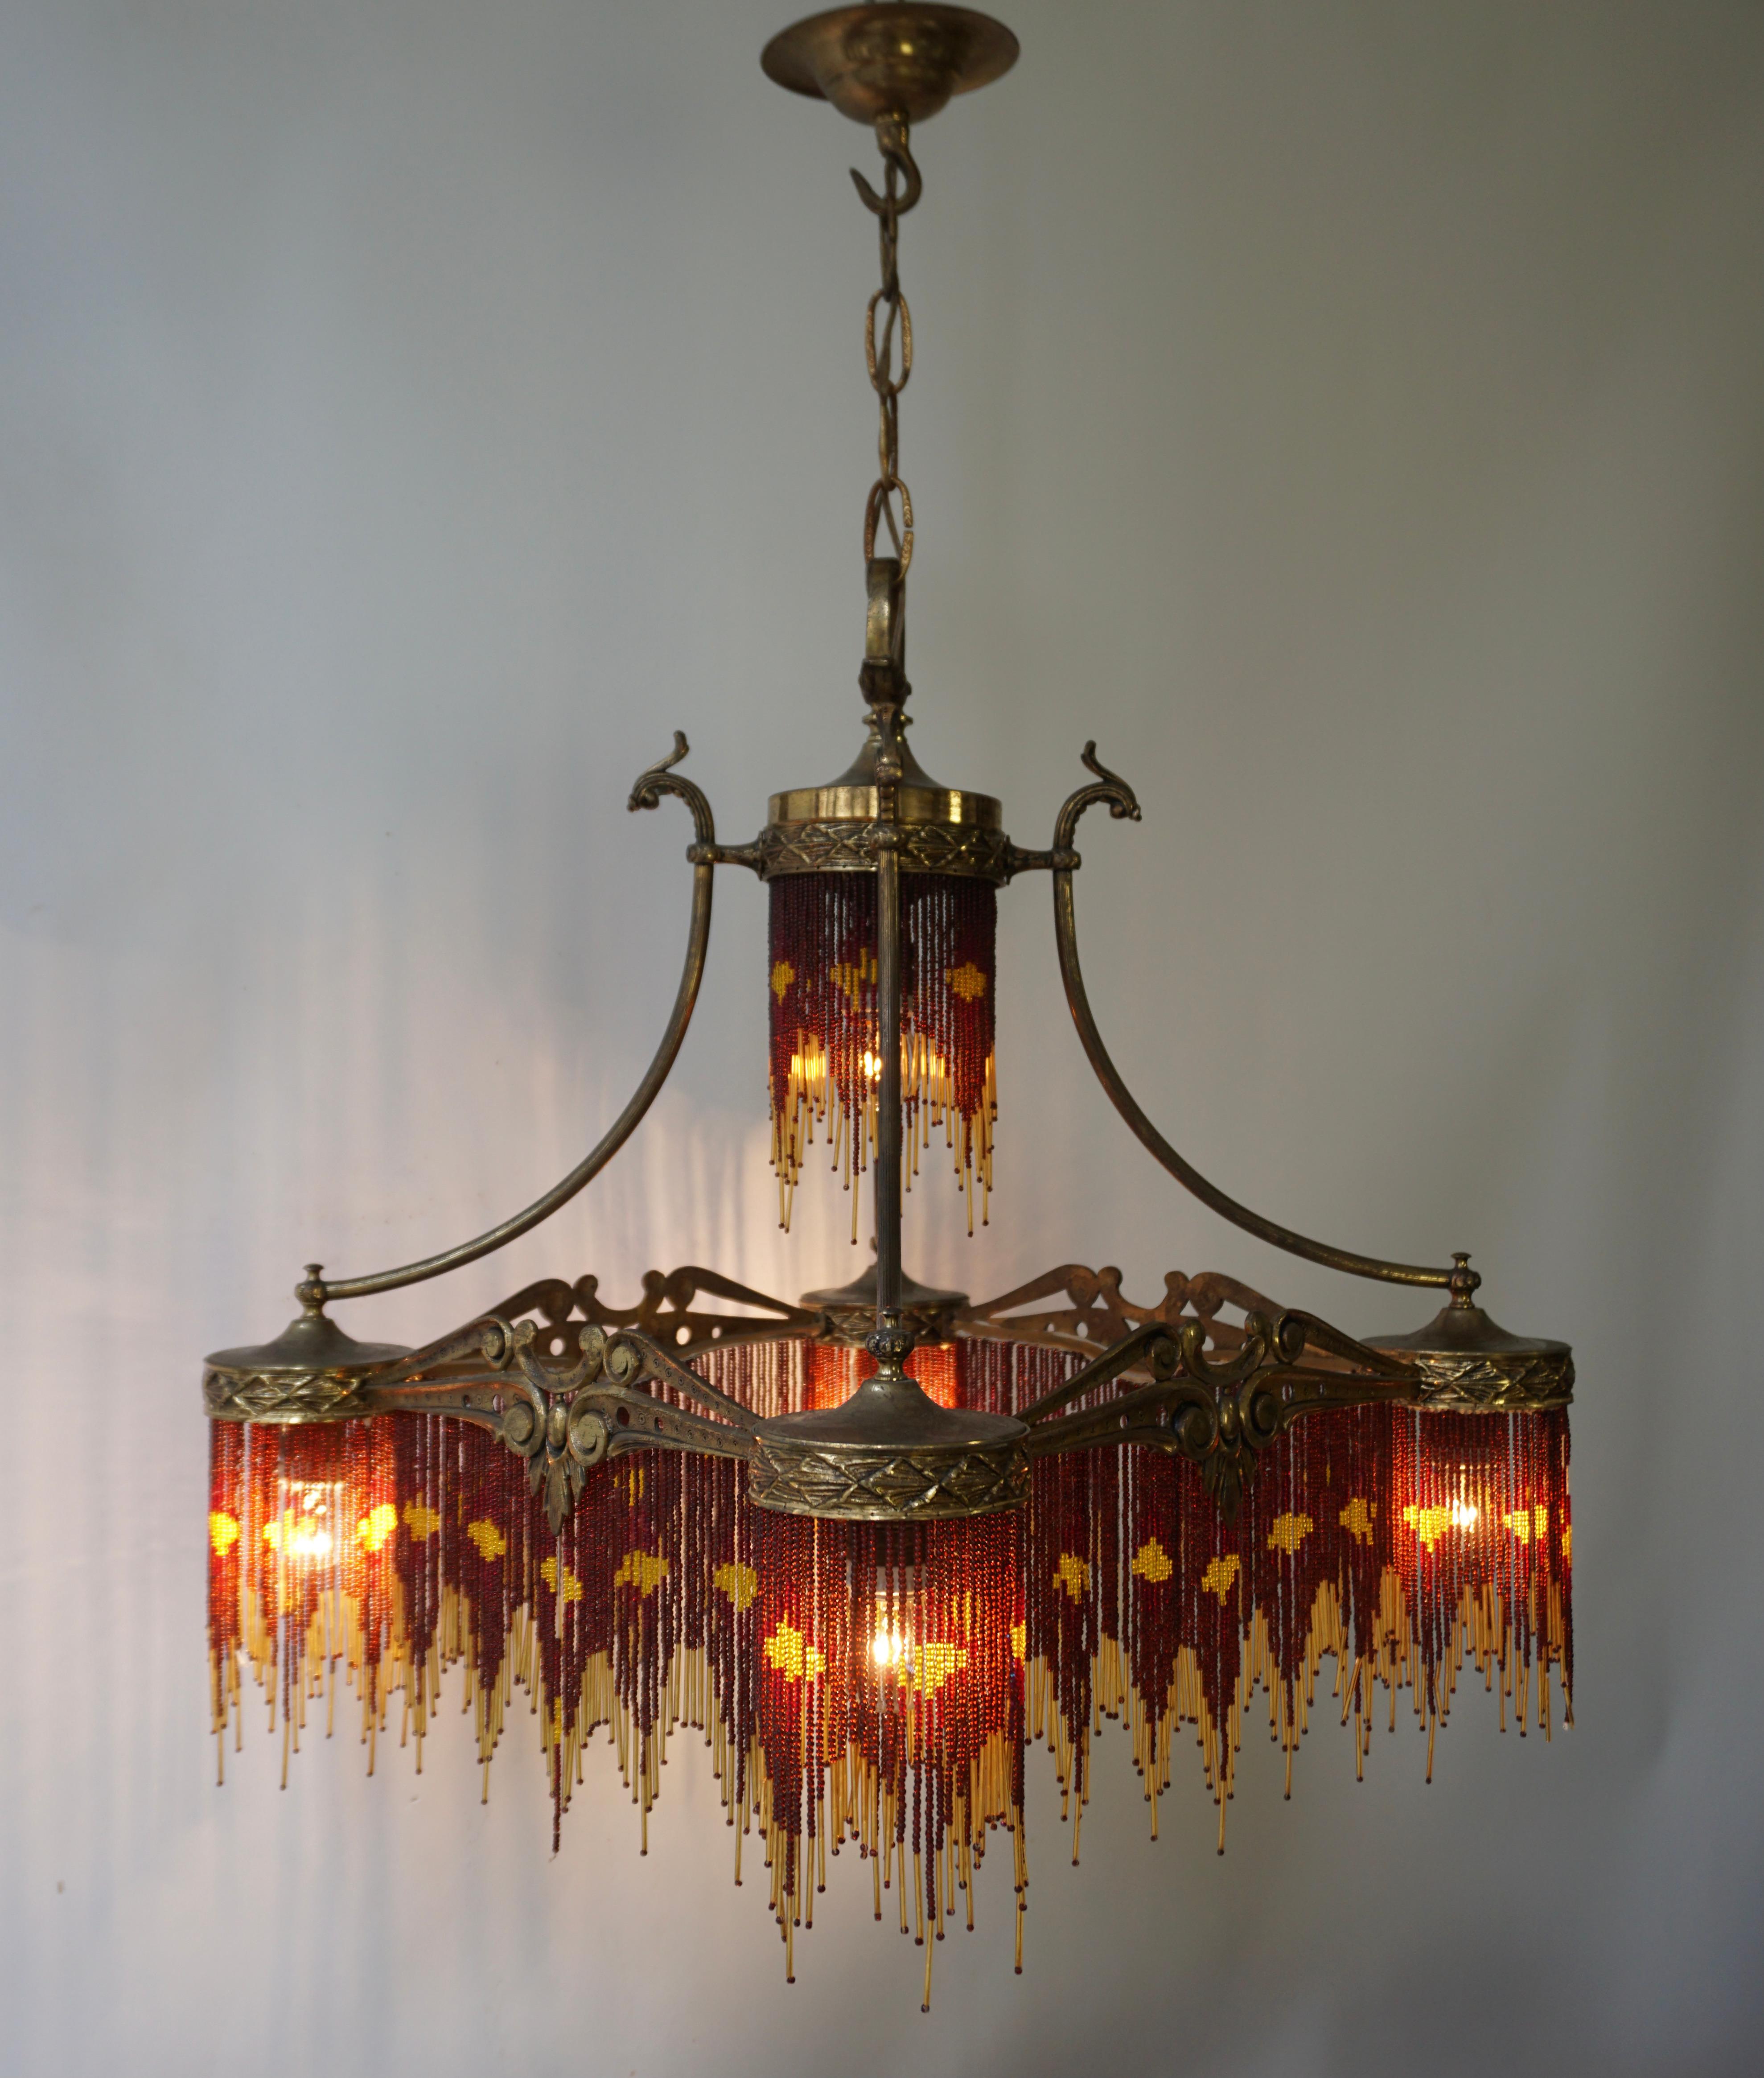 20th Century French Art Nouveau and Art Deco Amber Glass Straws Beaded Fringe Chandelier